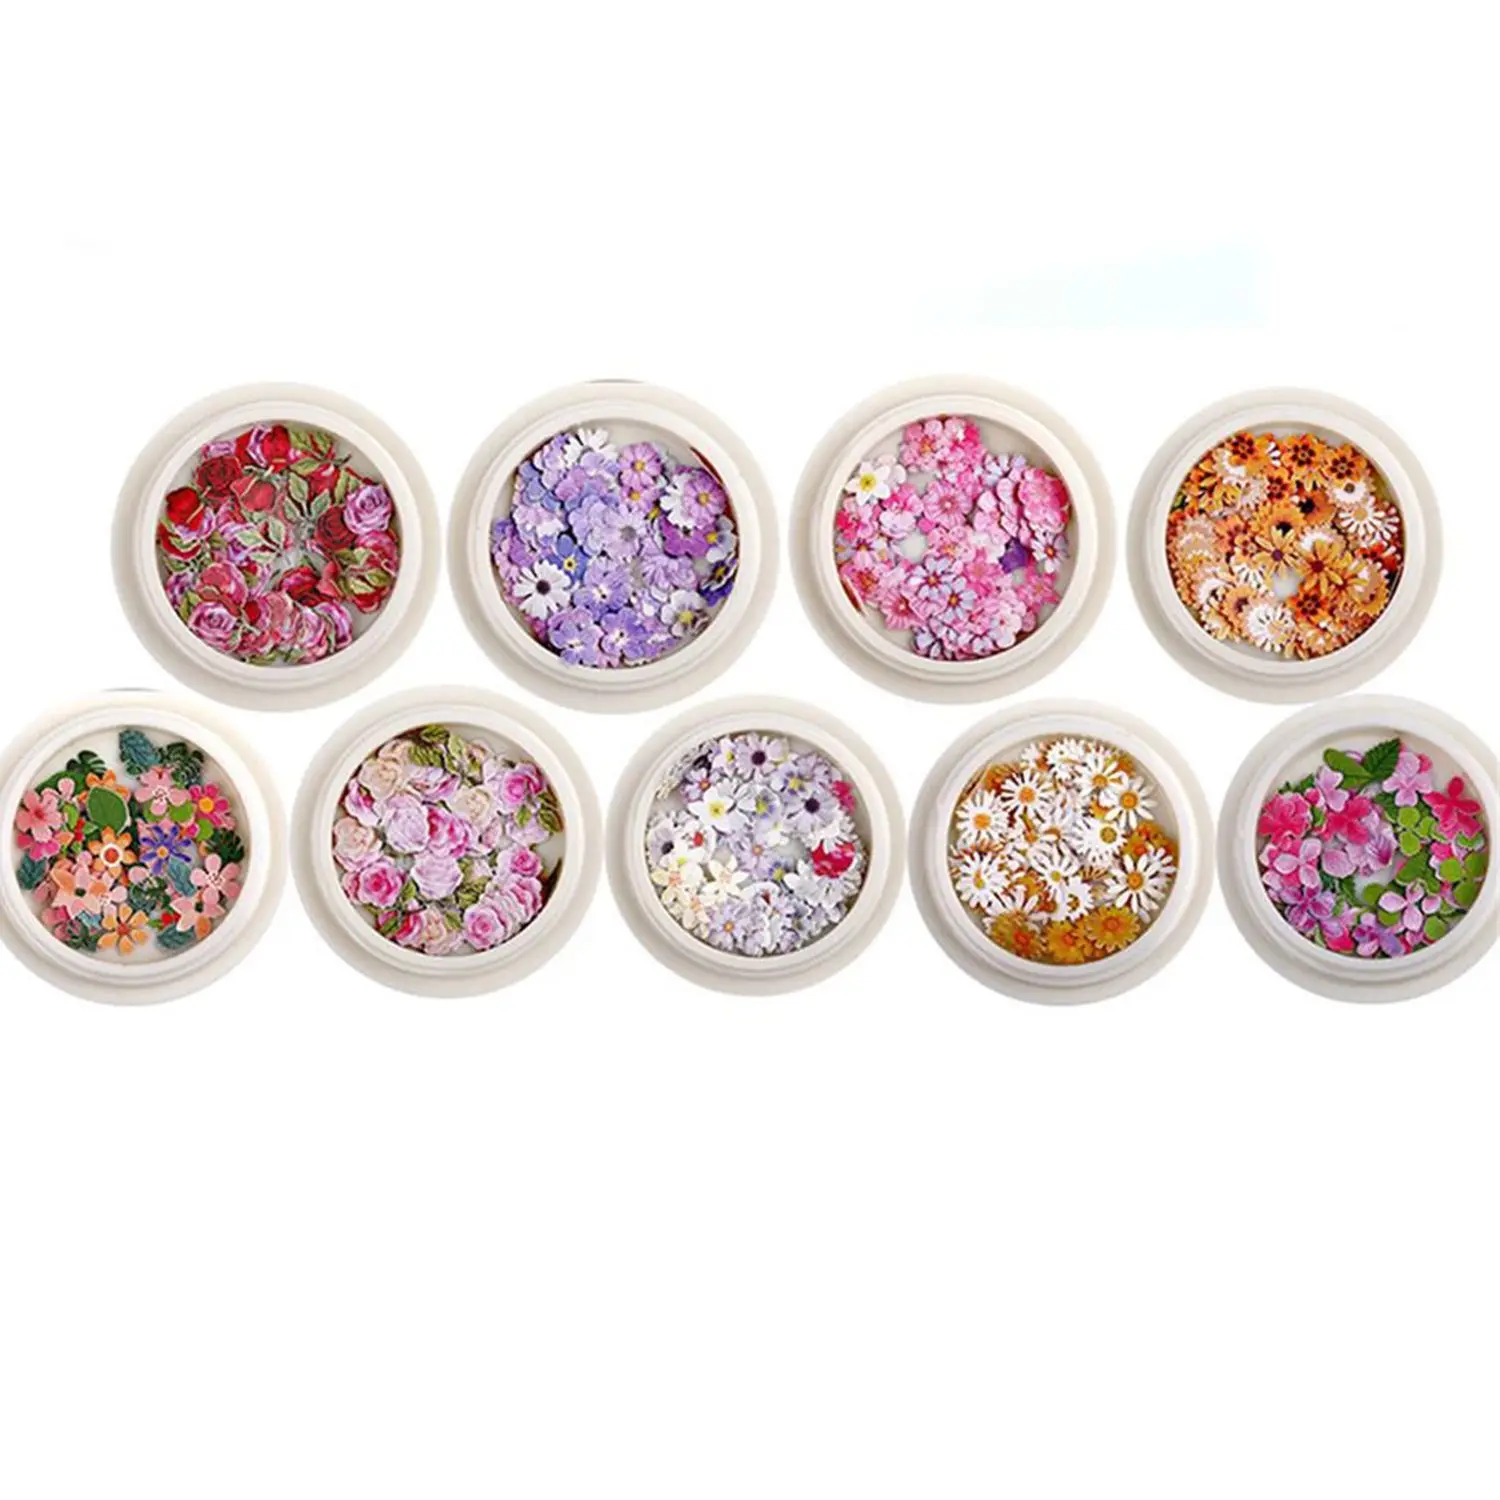 

DIY Manicure Wood Pulp Flakes Glitter Flakes Romantic Rose Nail Art Sequins Ultrathin Holographic Nail Paillettes